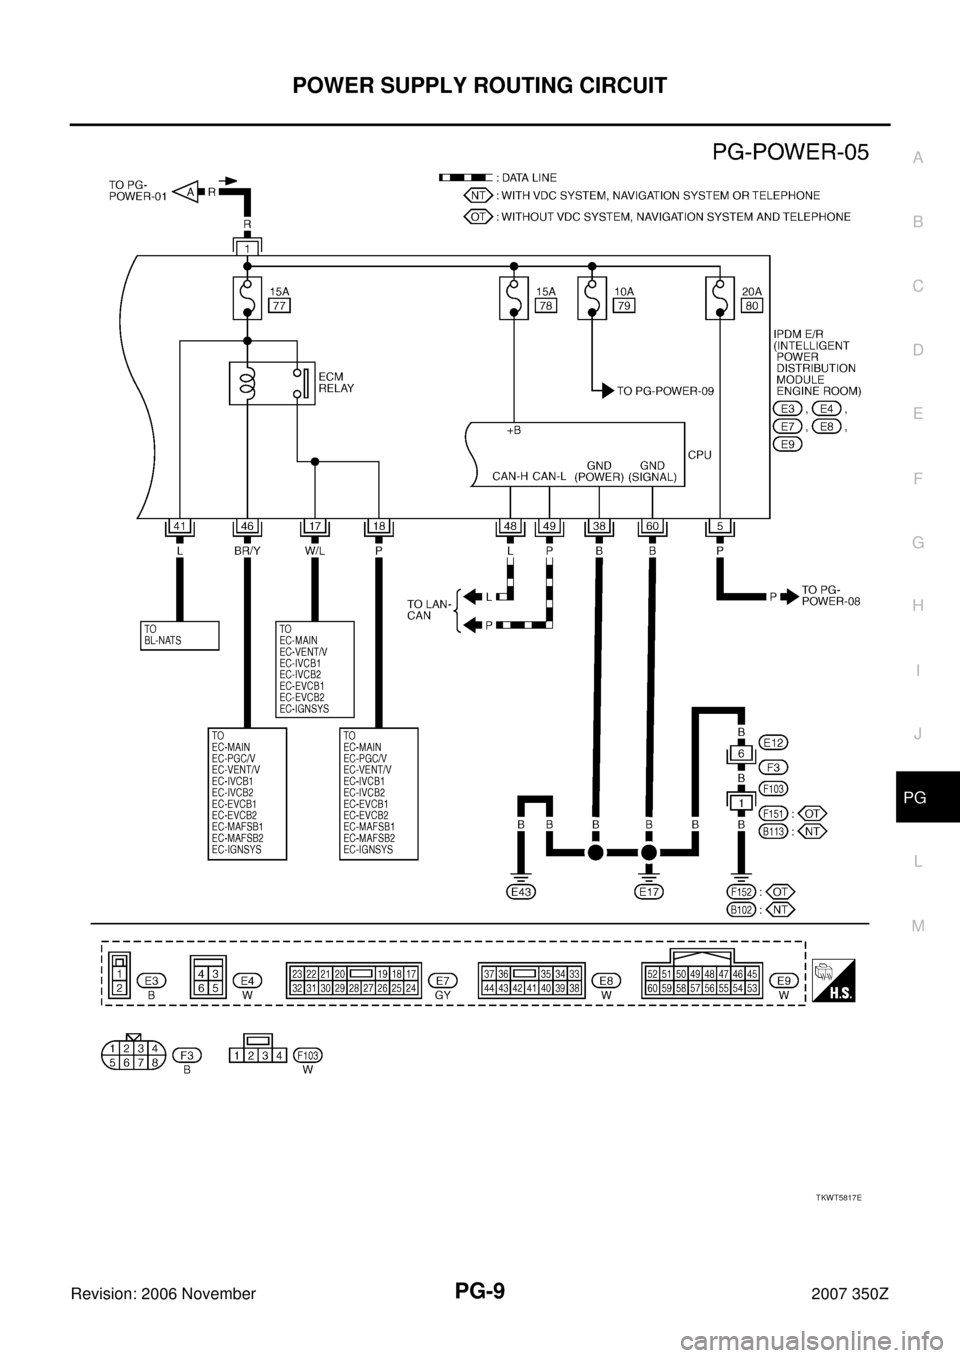 NISSAN 350Z 2007 Z33 Power Supply, Ground And Circuit Workshop Manual POWER SUPPLY ROUTING CIRCUIT
PG-9
C
D
E
F
G
H
I
J
L
MA
B
PG
Revision: 2006 November2007 350Z
TKWT5817E 